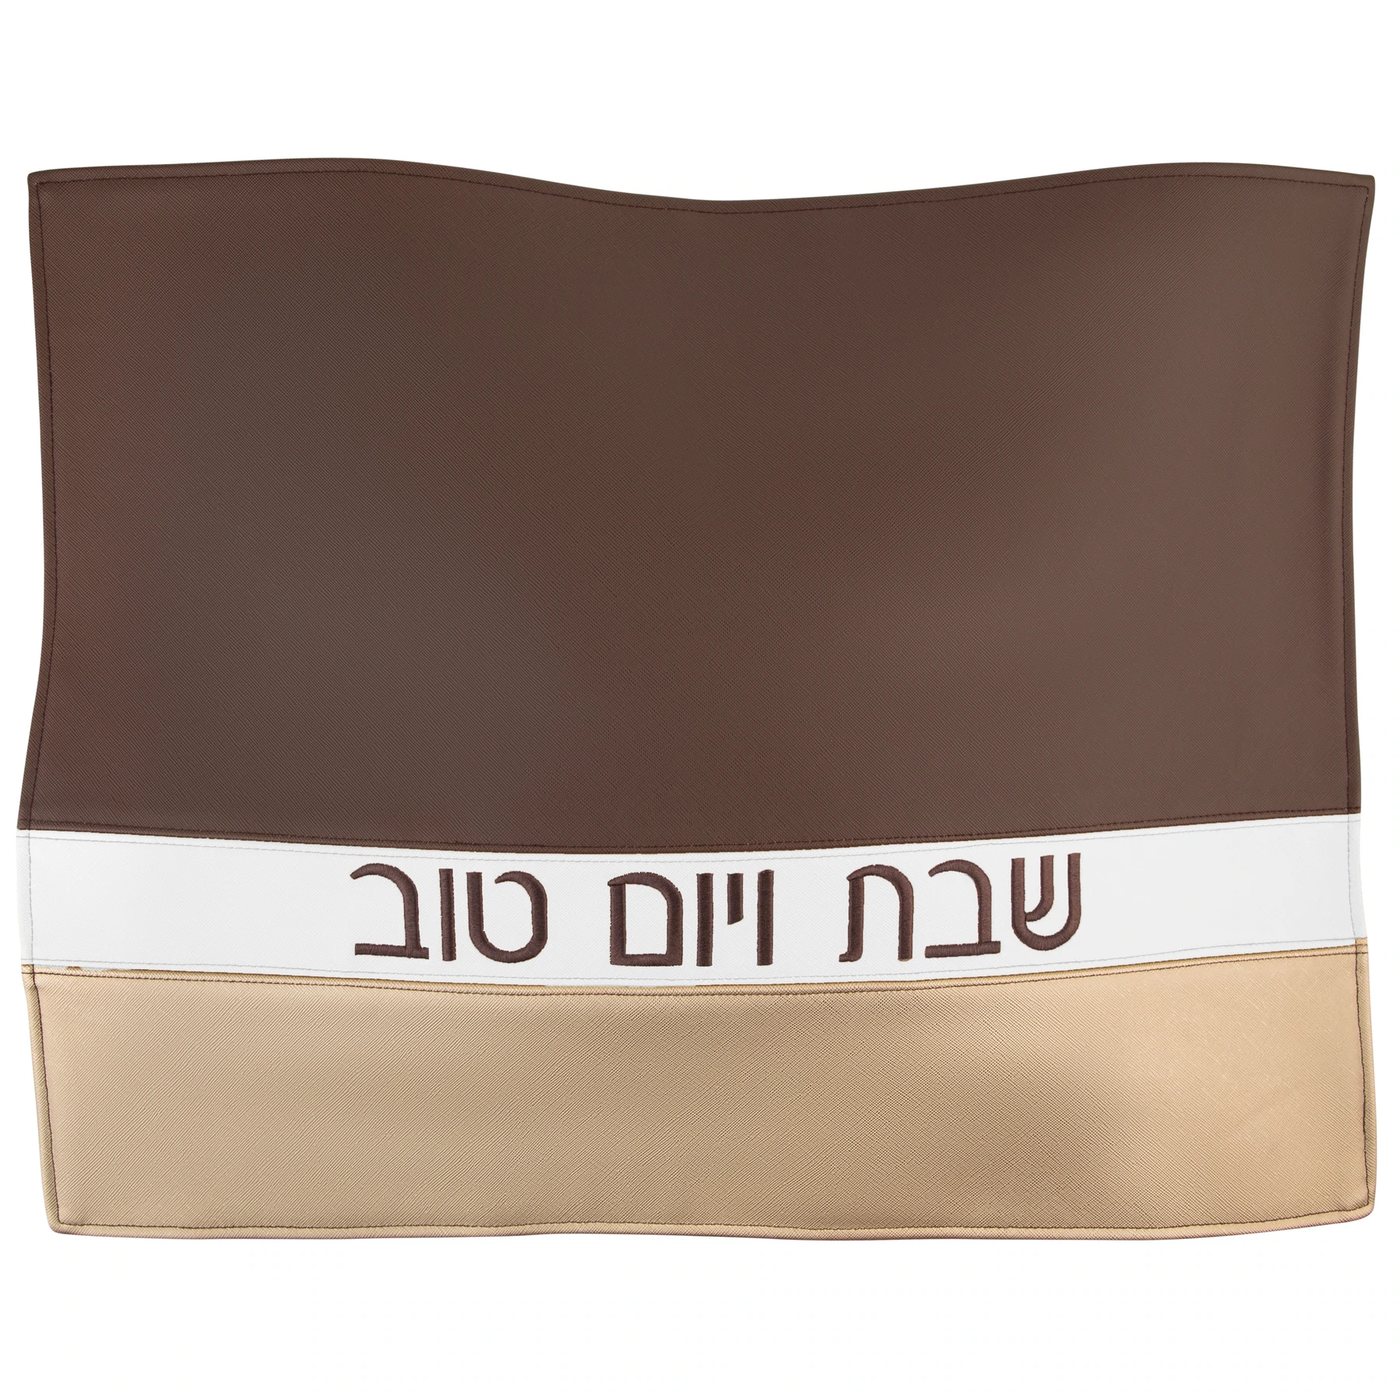 Horizontal Lined Challah Cover - Brown & White & Gold - Set With Style